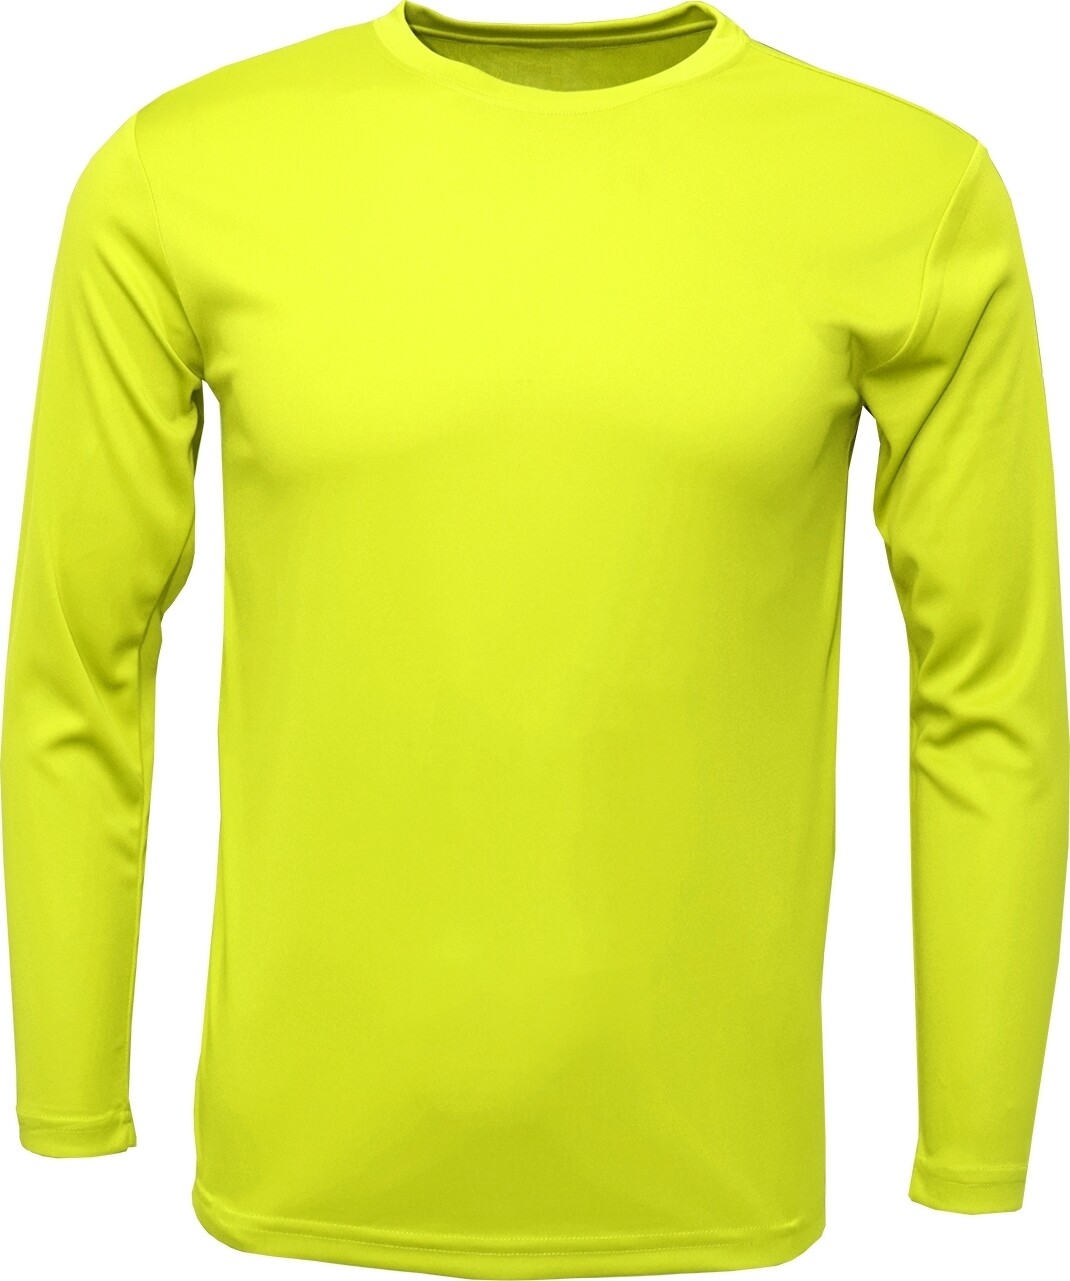 Safety Yellow / Front, Back & 1 Sleeve